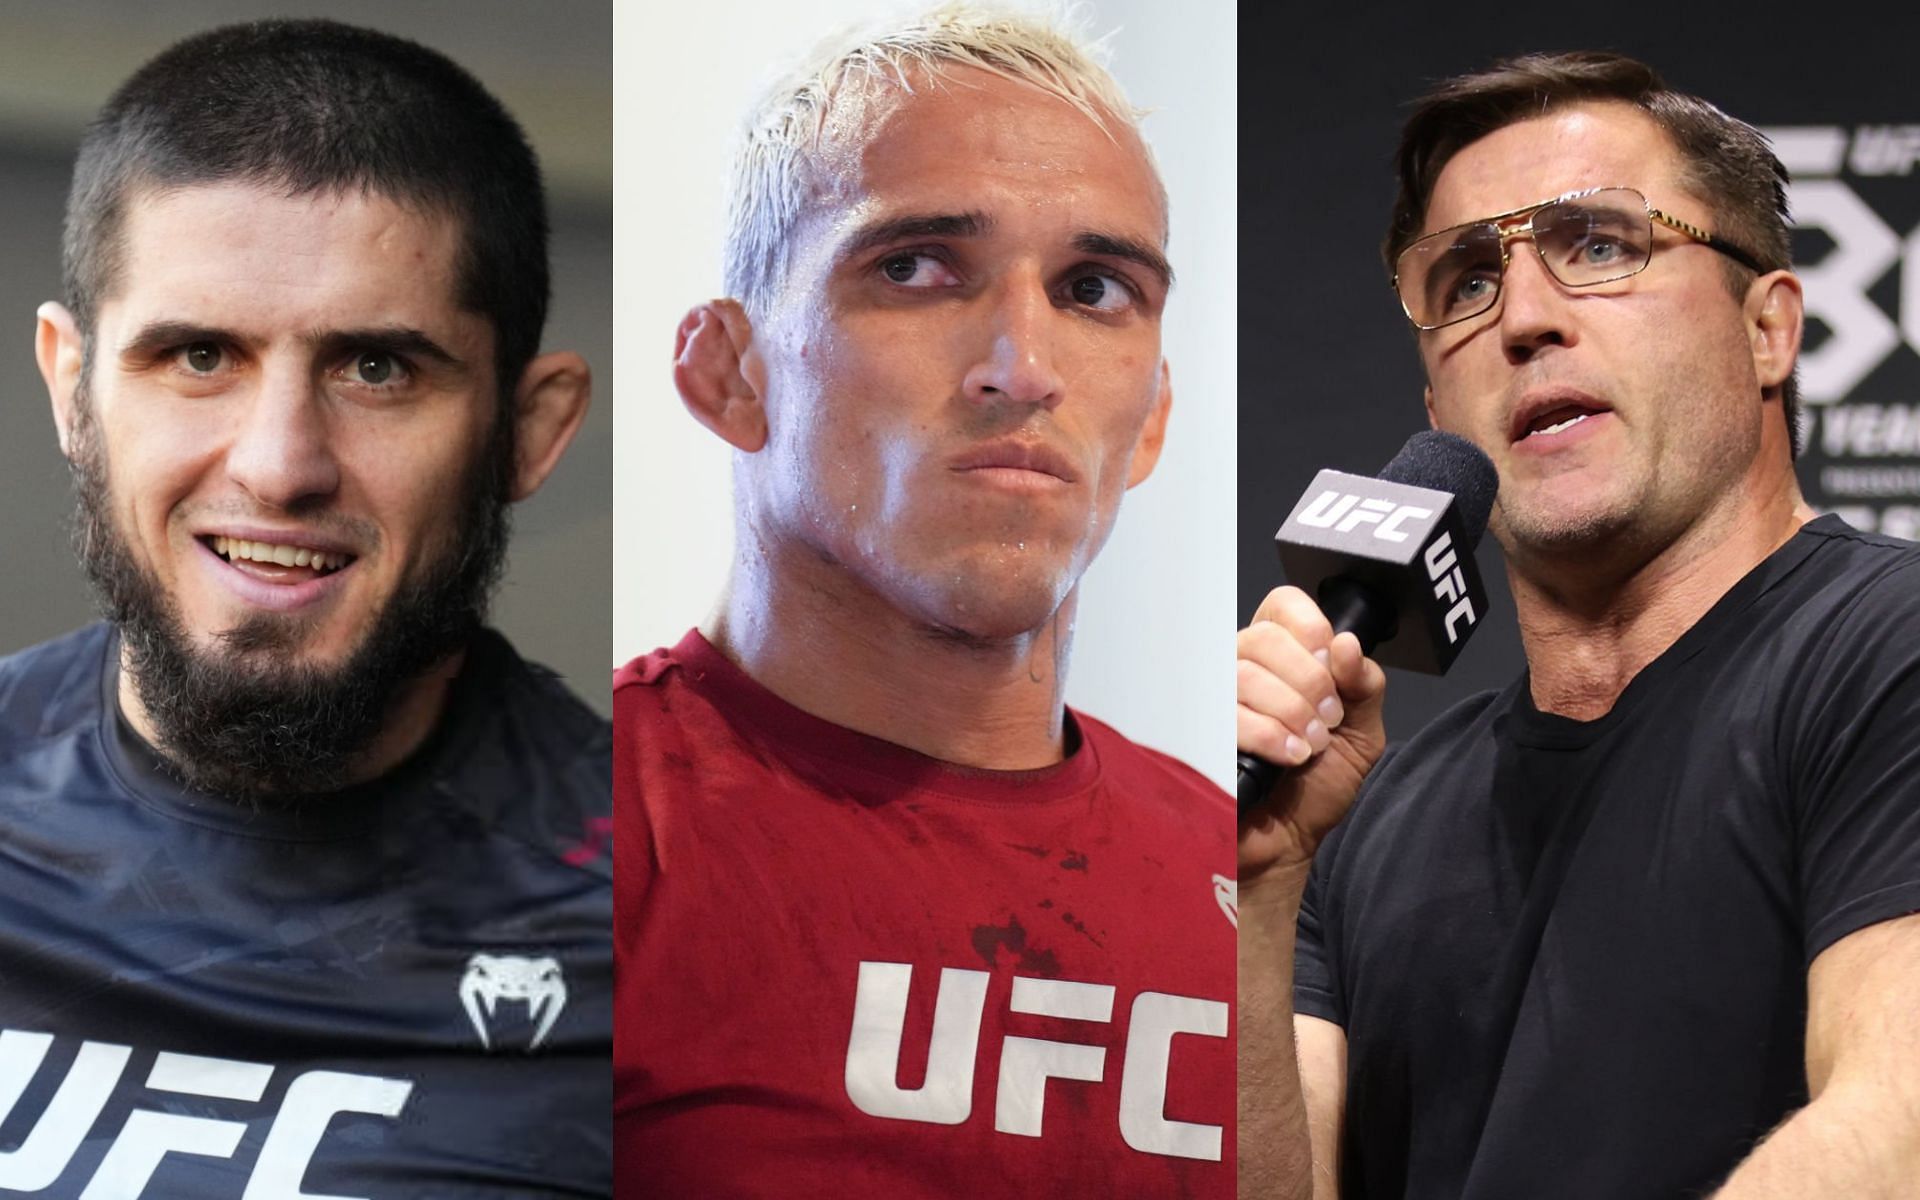 Islam Makhachev (left), Charles Oliveira (middle) and Chael Sonnen (right) [Images Courtesy: @GettyImages]